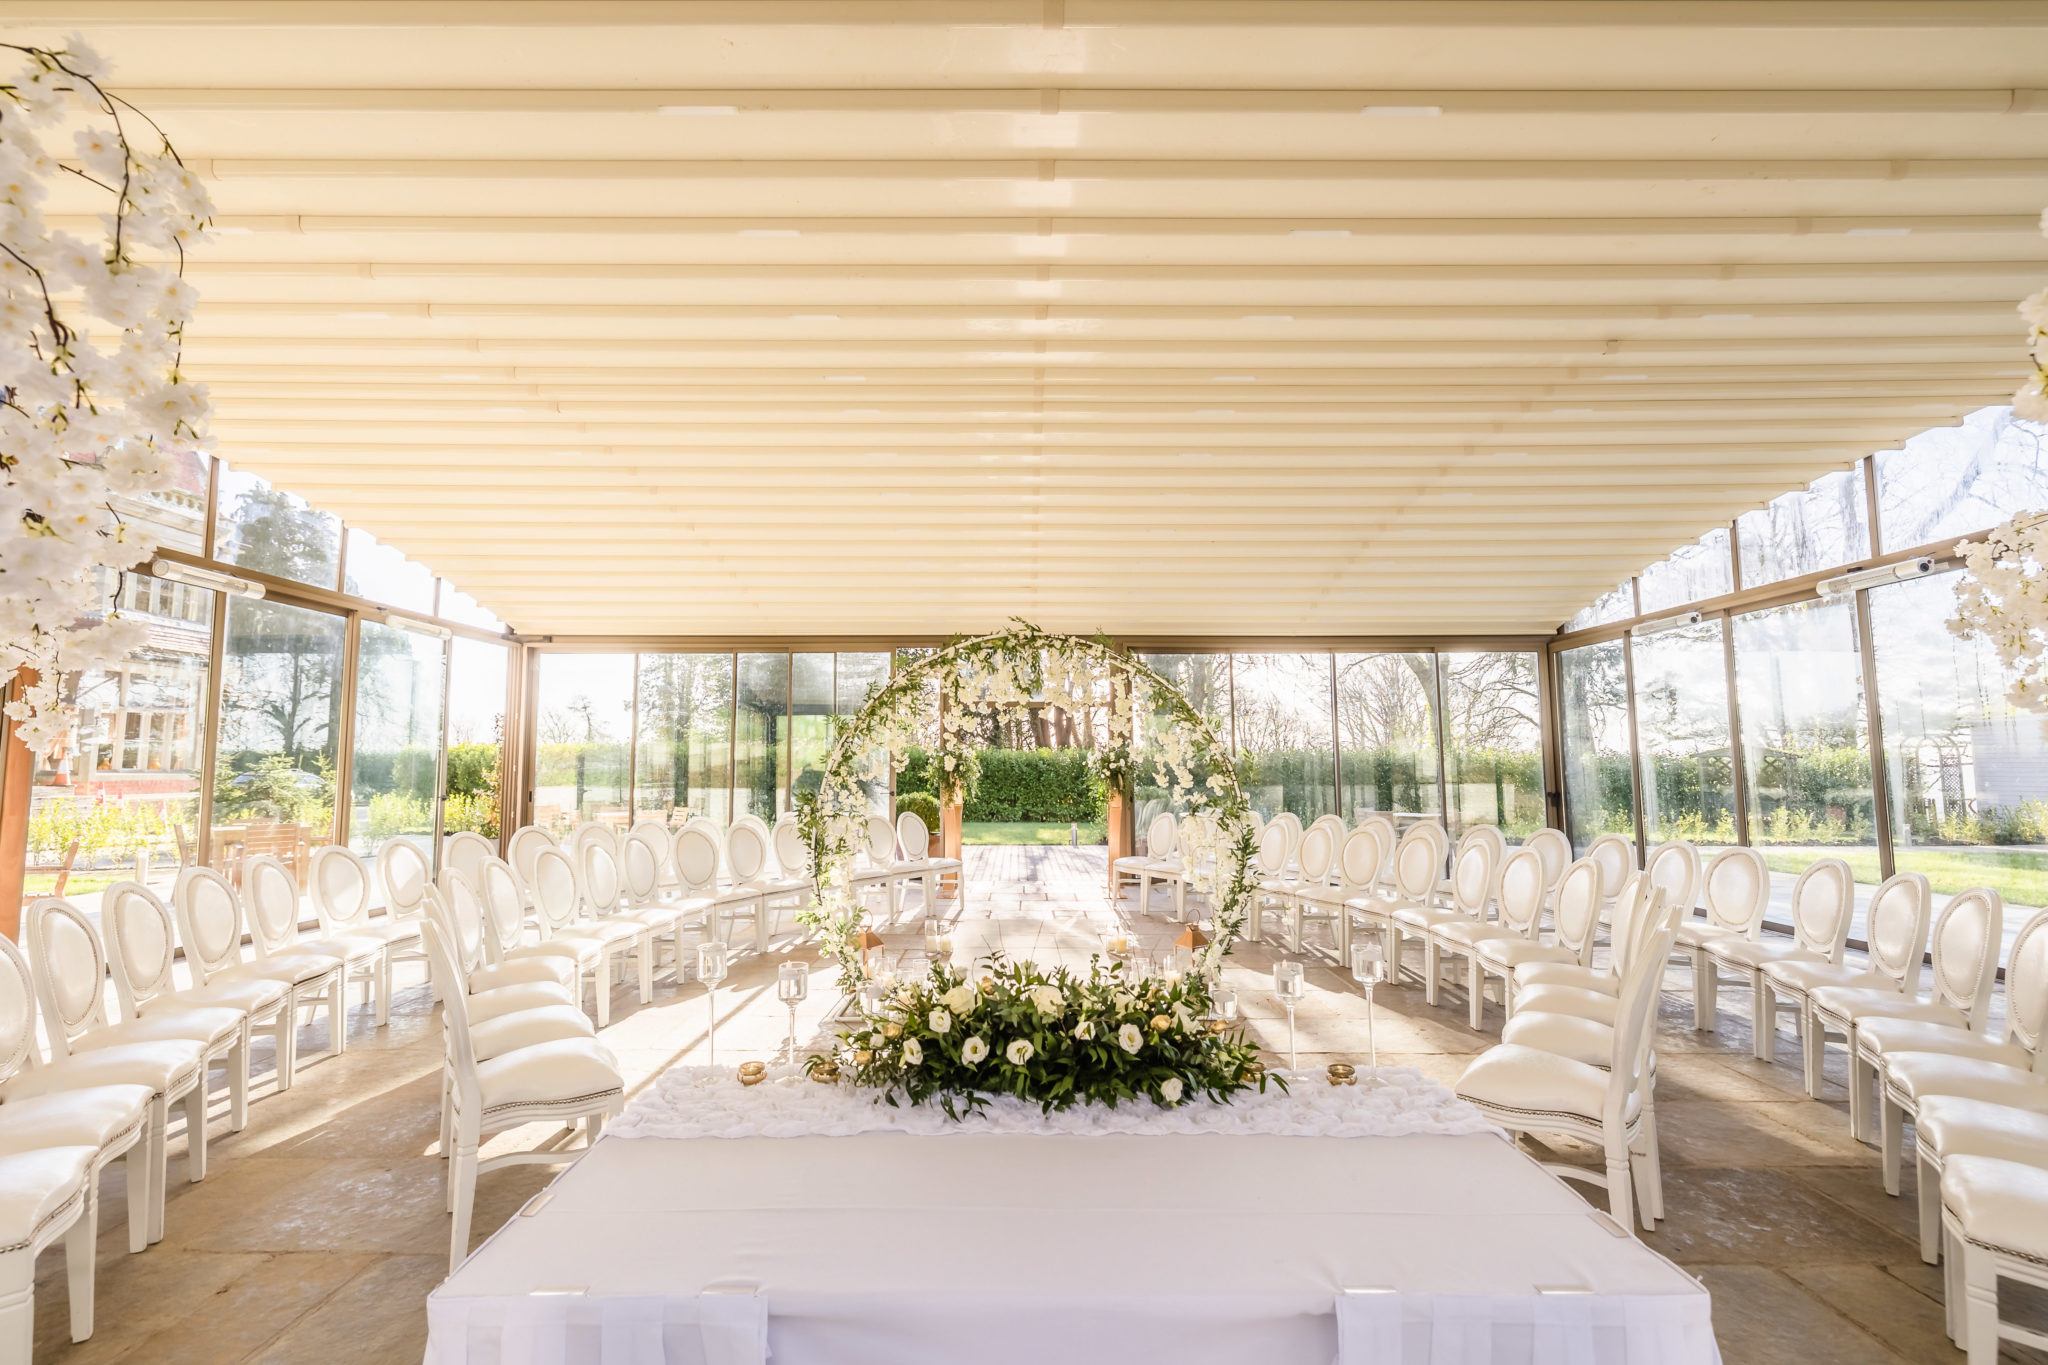 Our beautiful new Folly, a dazzling panoramic glasshouse with retractable roof in for you to say "I Do" outside in our garden with that indoors comfort. 